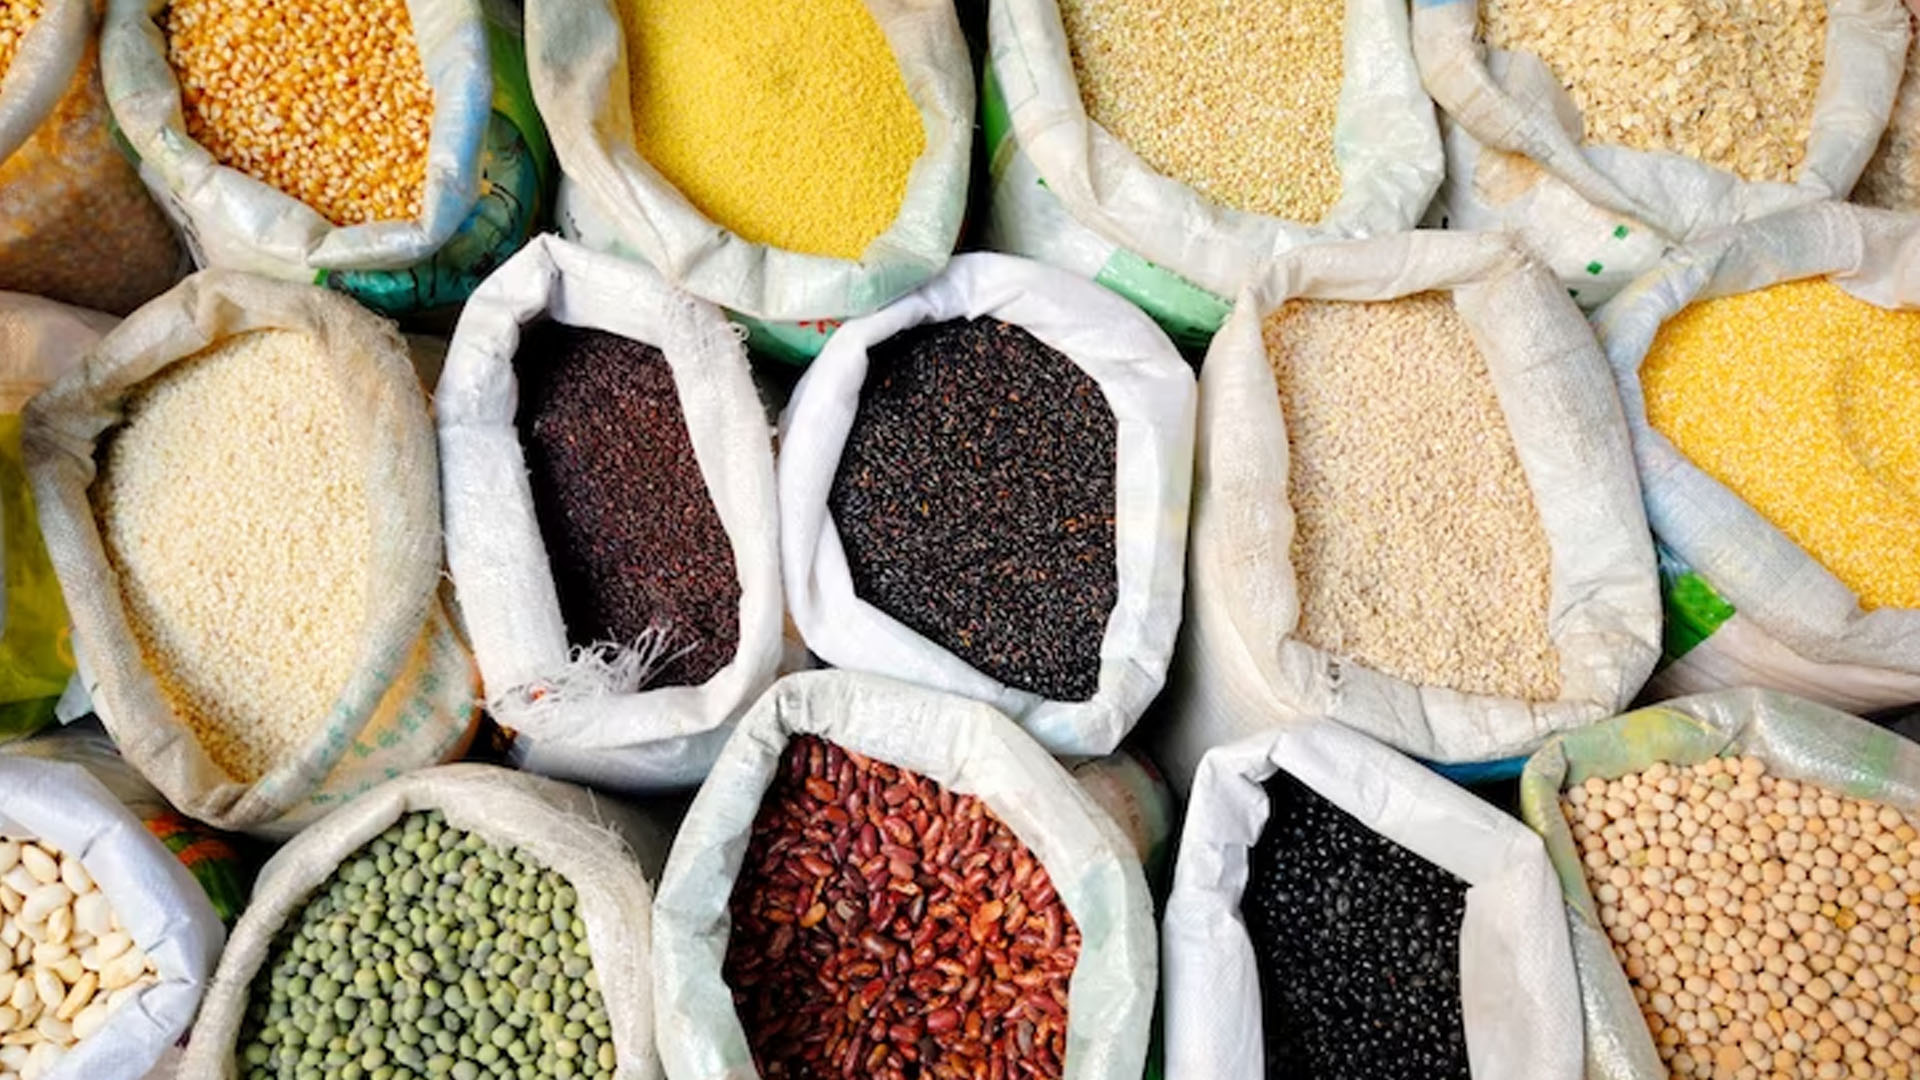 What Are The Economic Health and Environmental Benefits of Pulses?